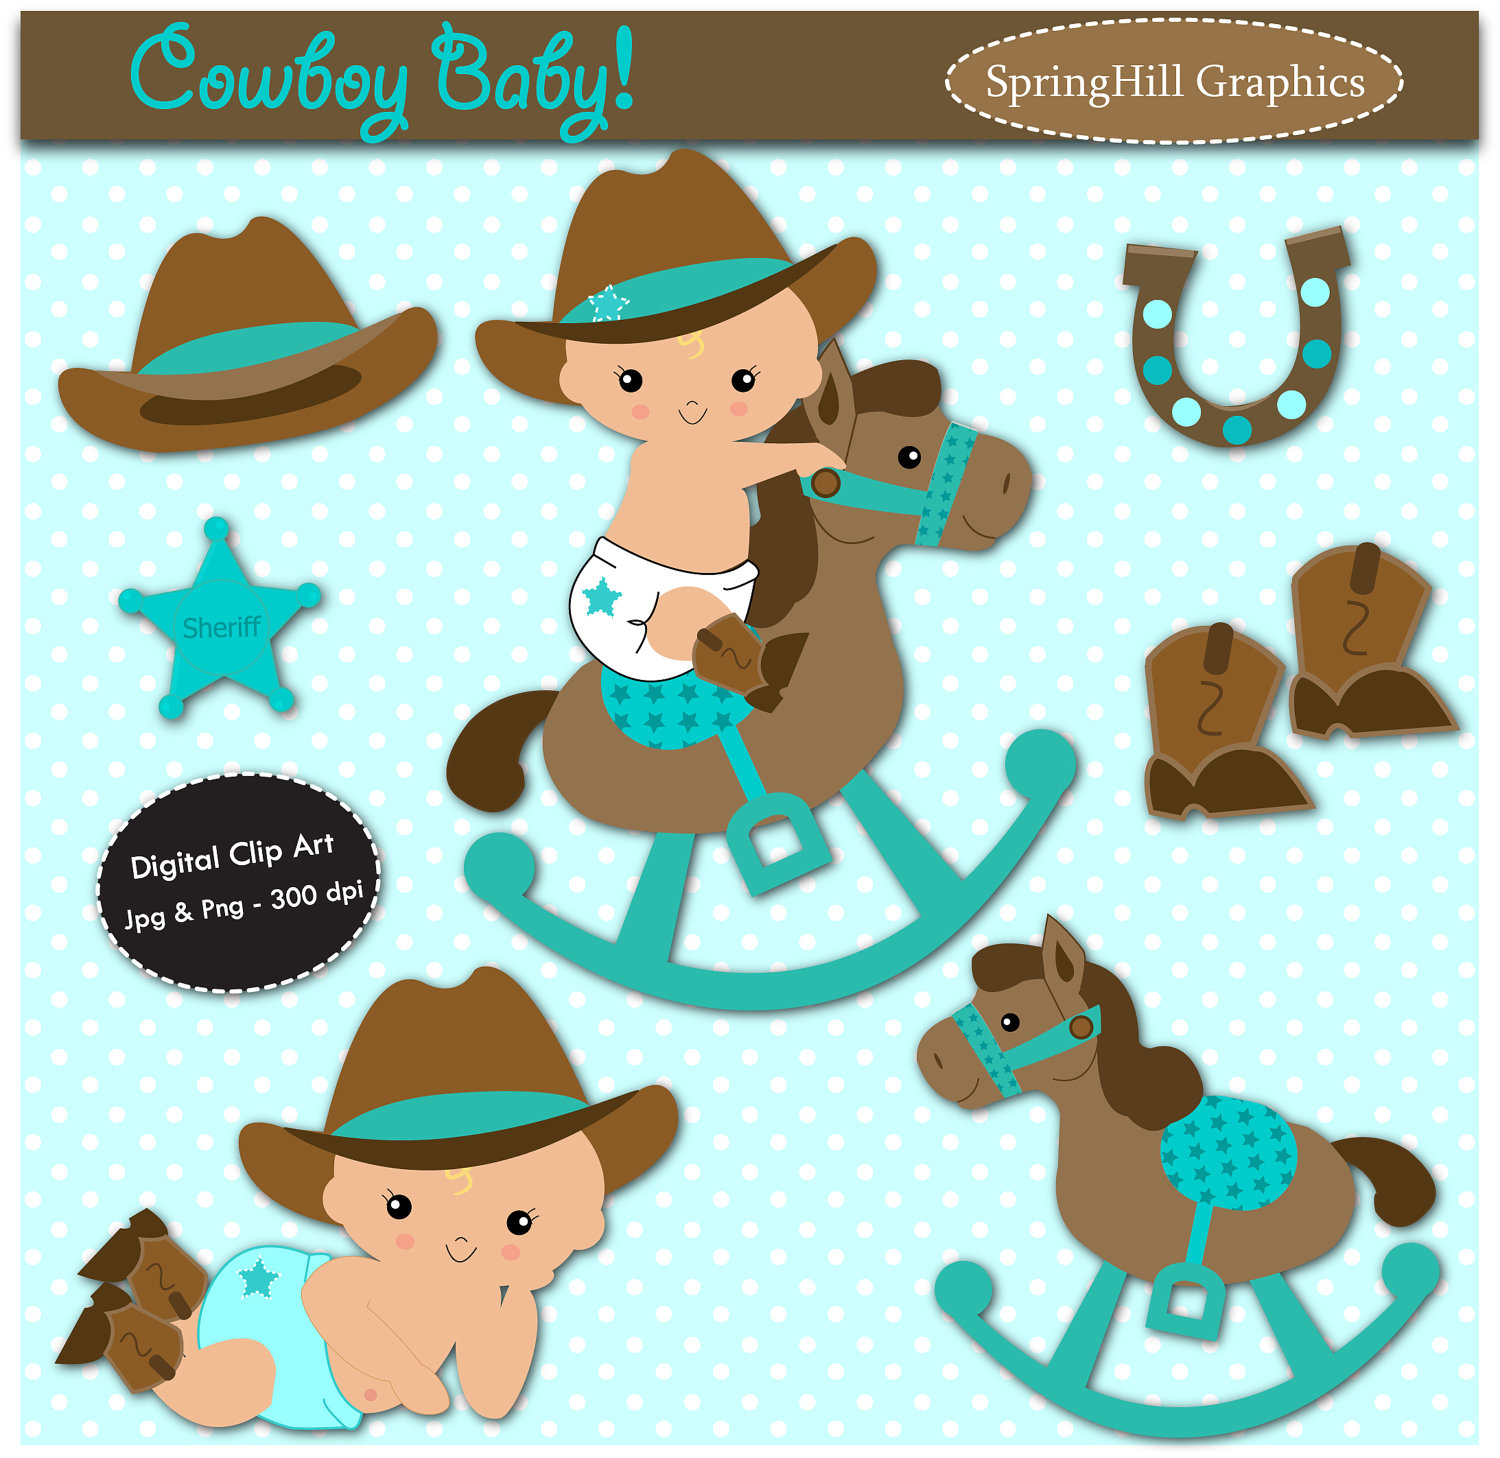 Unavailable Listing On Etsy - Baby Cowboy Clipart